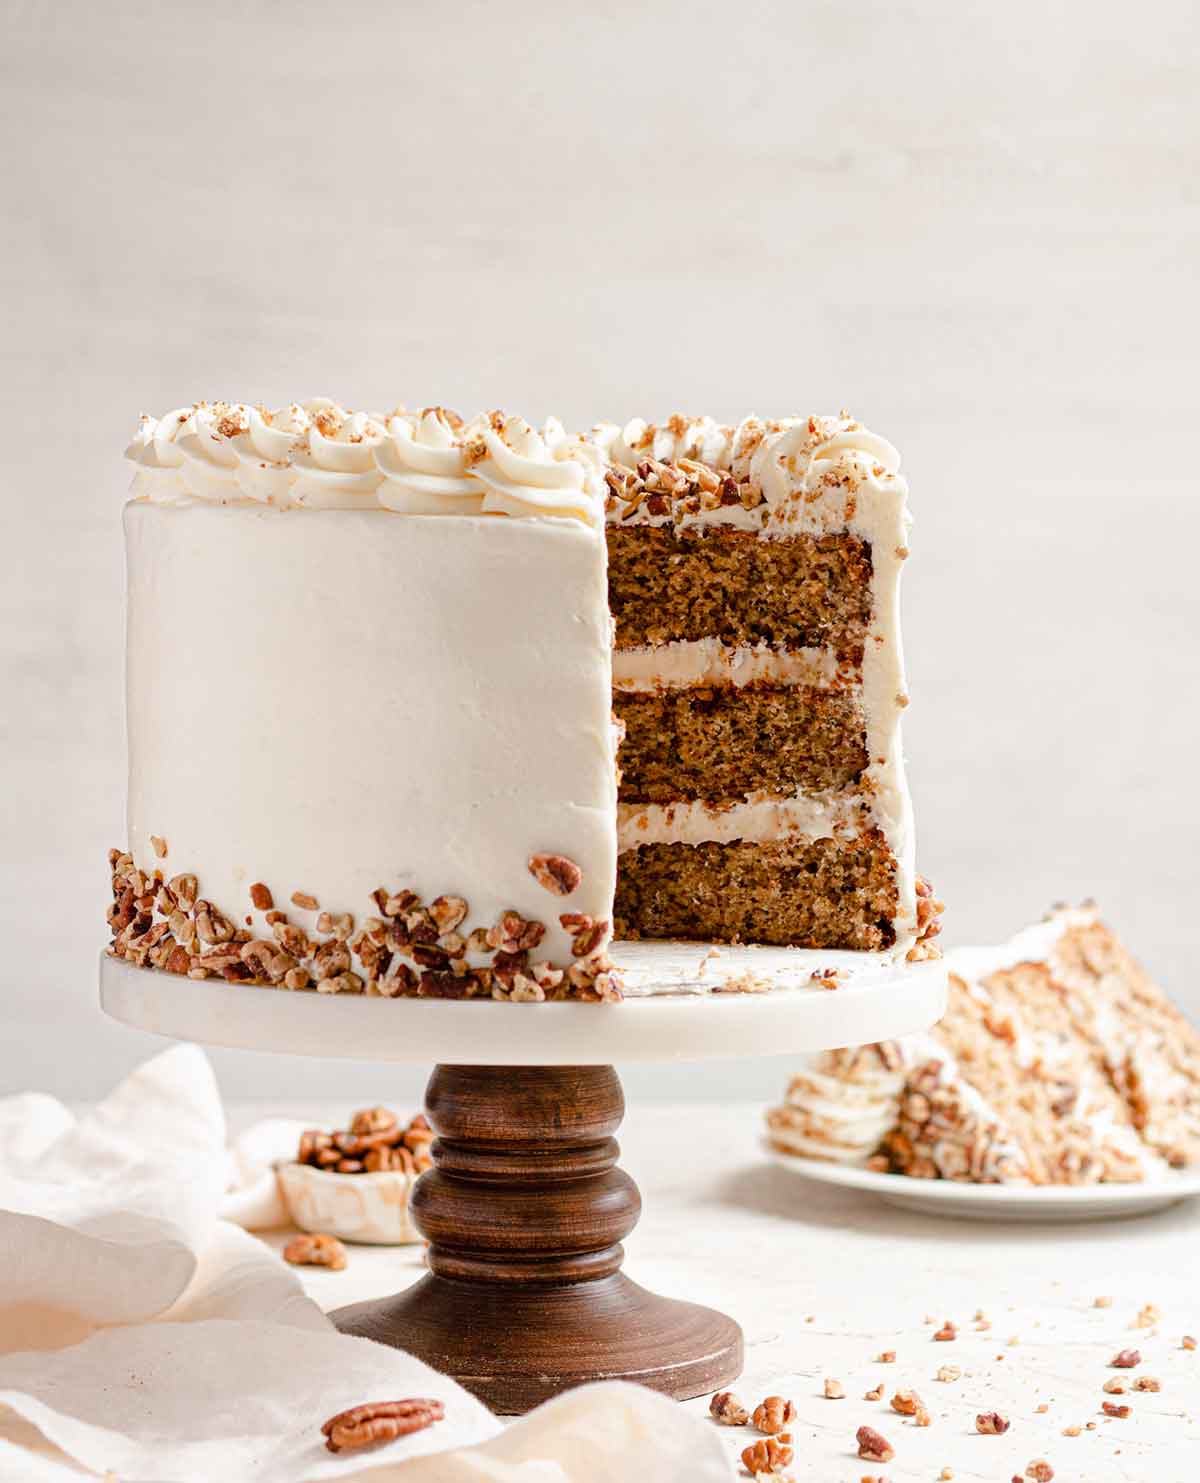 Side view of three-layer hummingbird cake with a slice removed, filling and frosted with cream cheese frosting and garnished with chopped pecans.